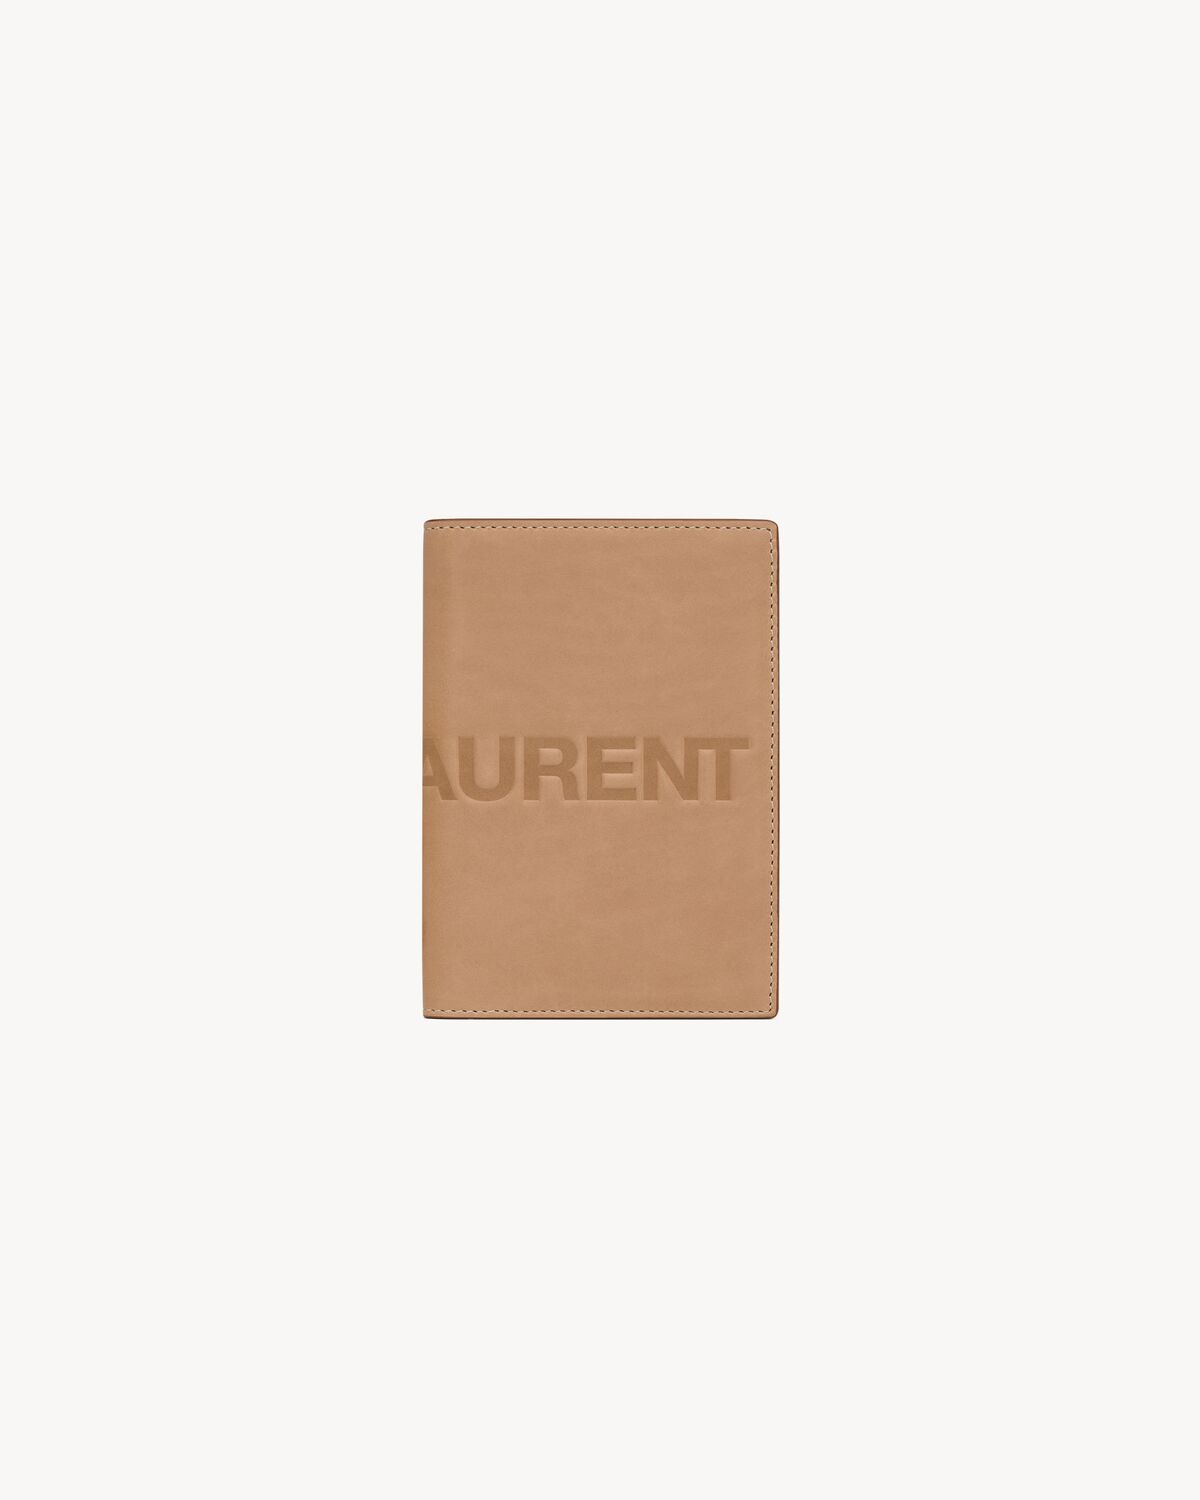 SAINT LAURENT passport case in vegetable-tanned leather